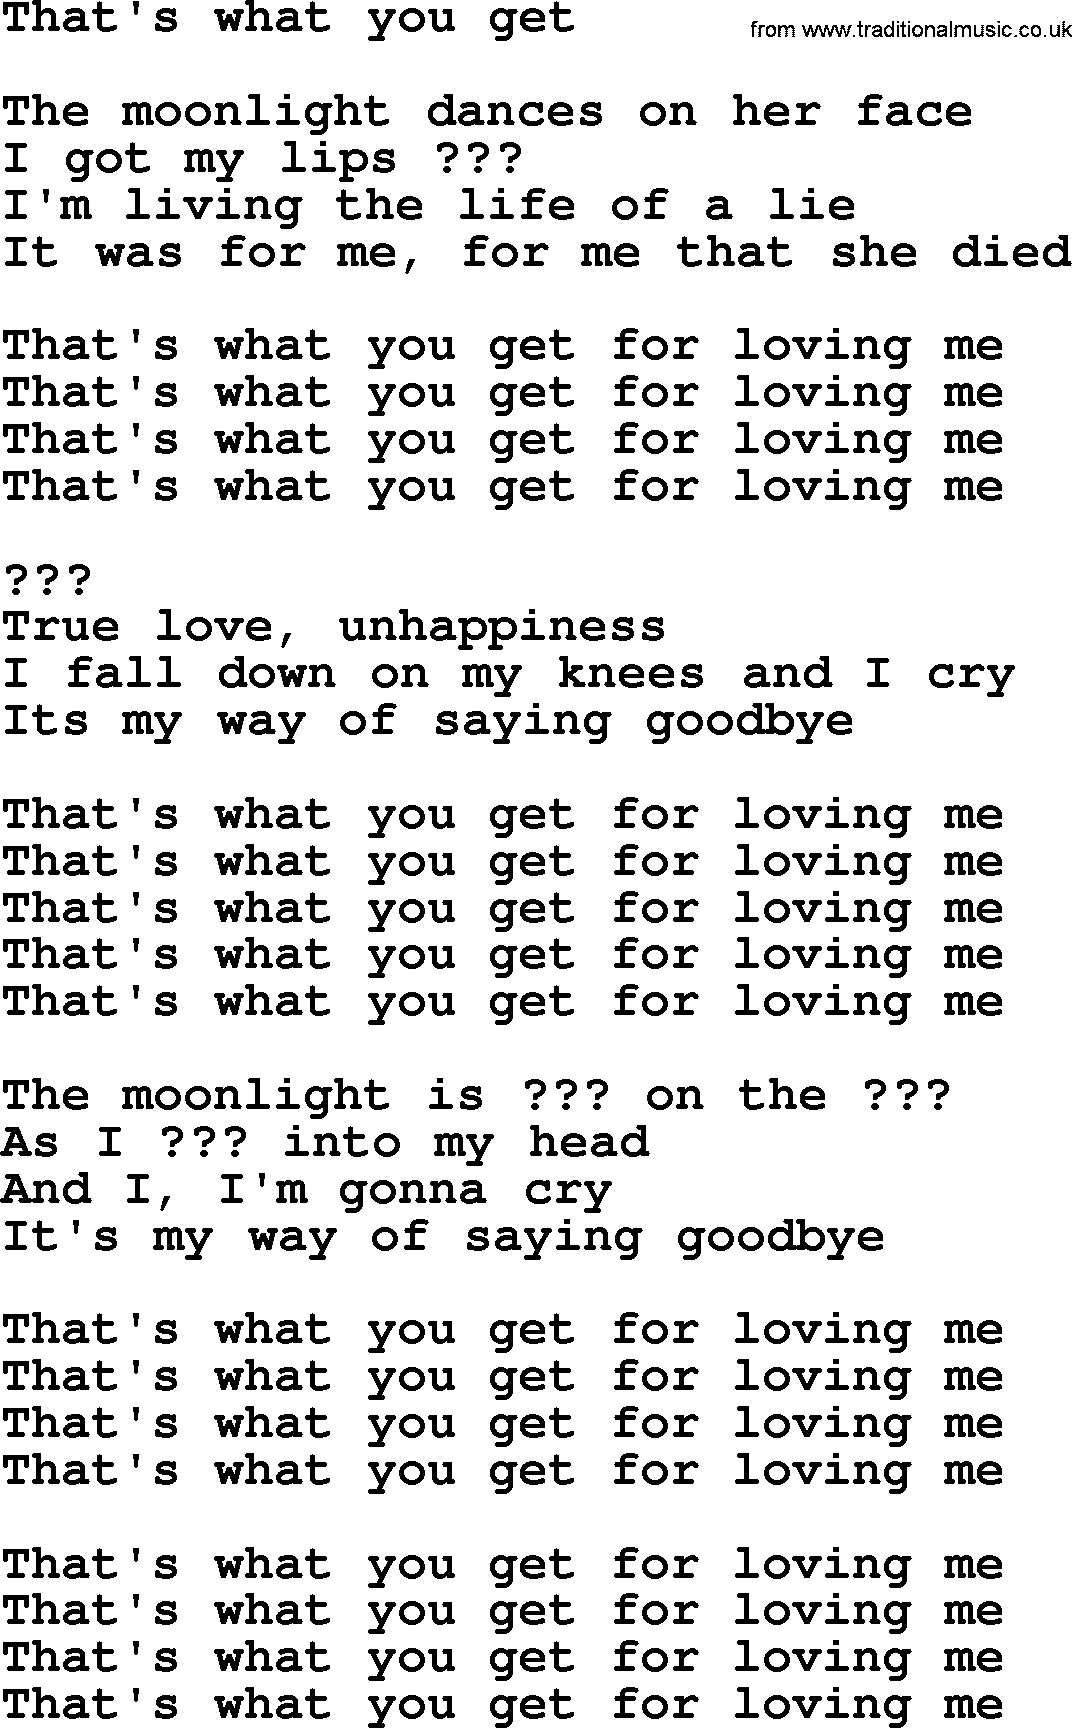 Bruce Springsteen song: That's What You Get lyrics